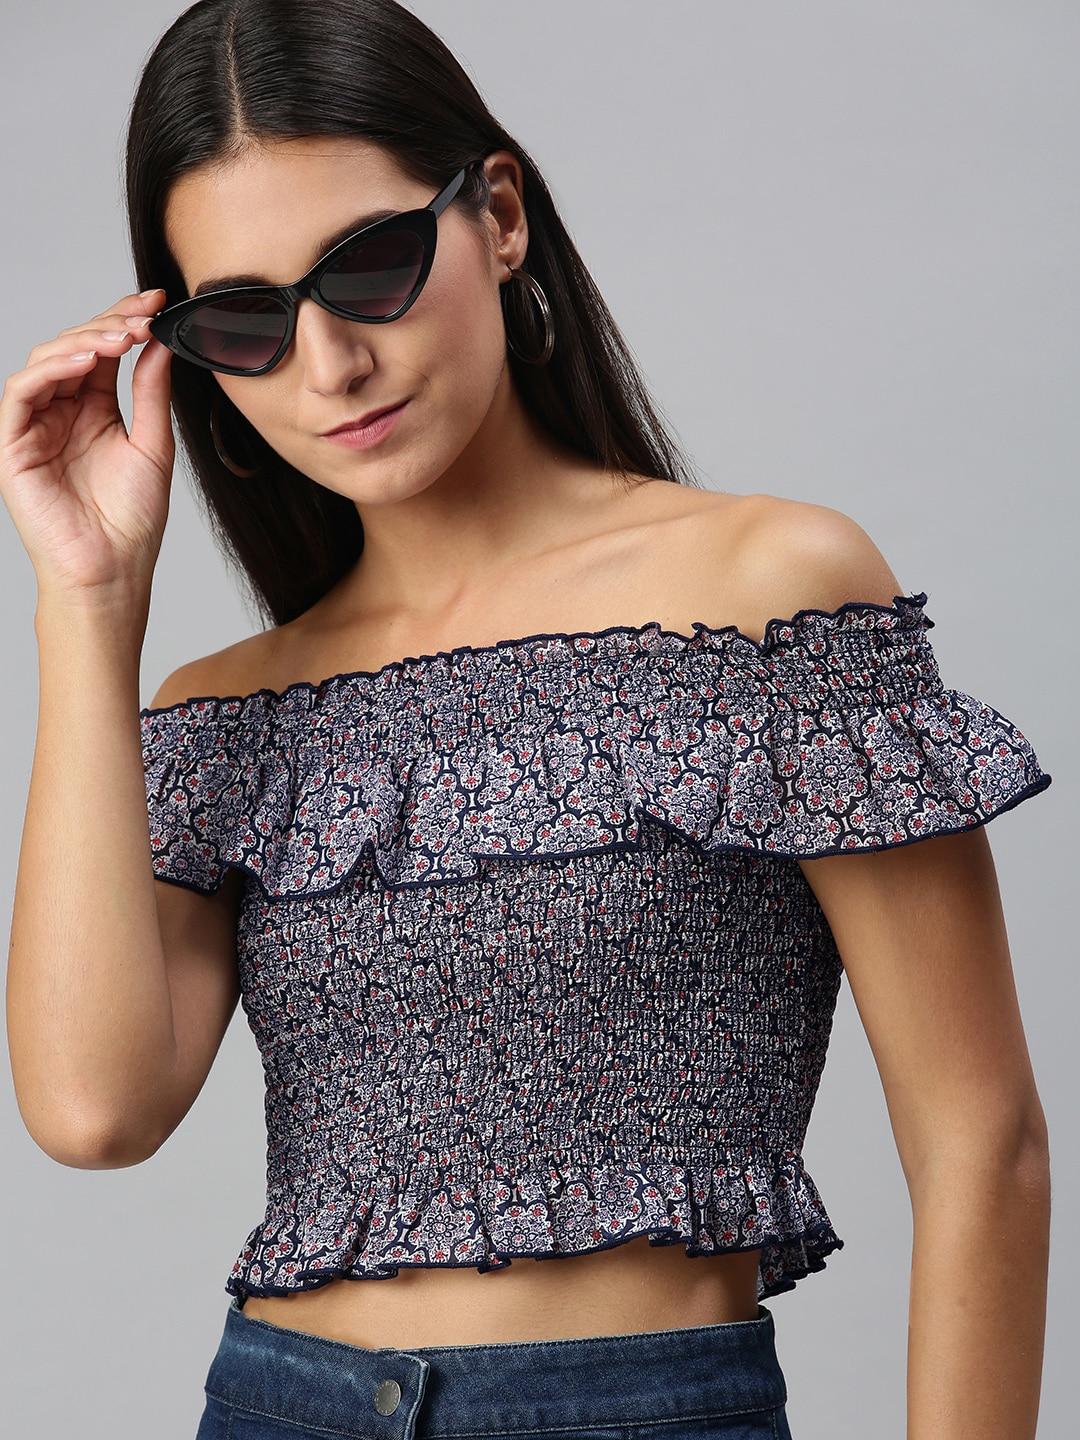 kassually navy blue and purple floral print smocked crop top